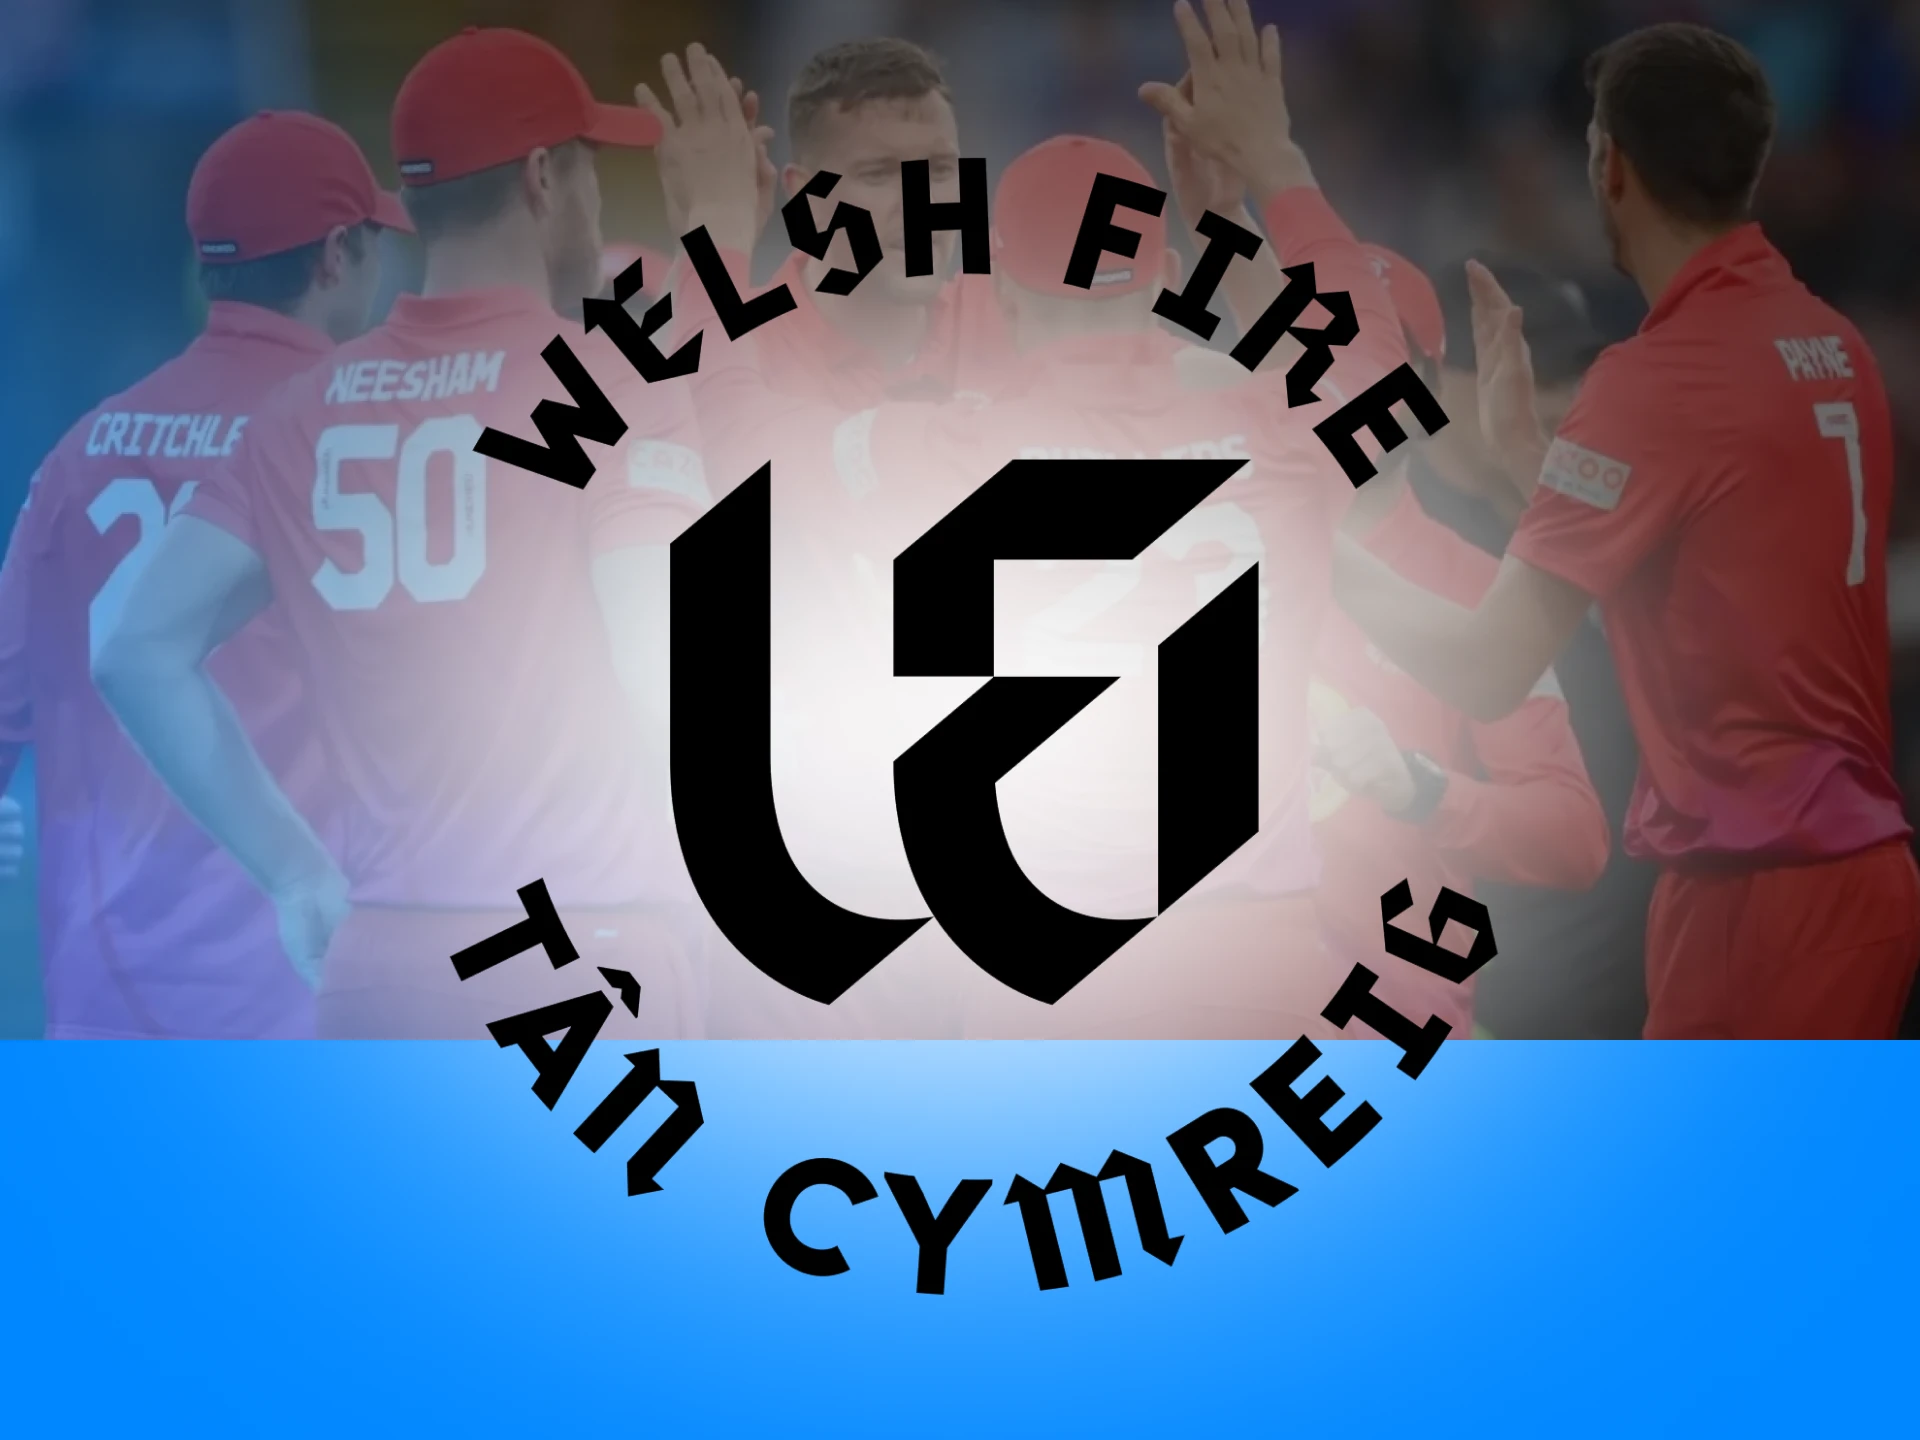 Welsh Fire is a great team to bet on and watch their matches.